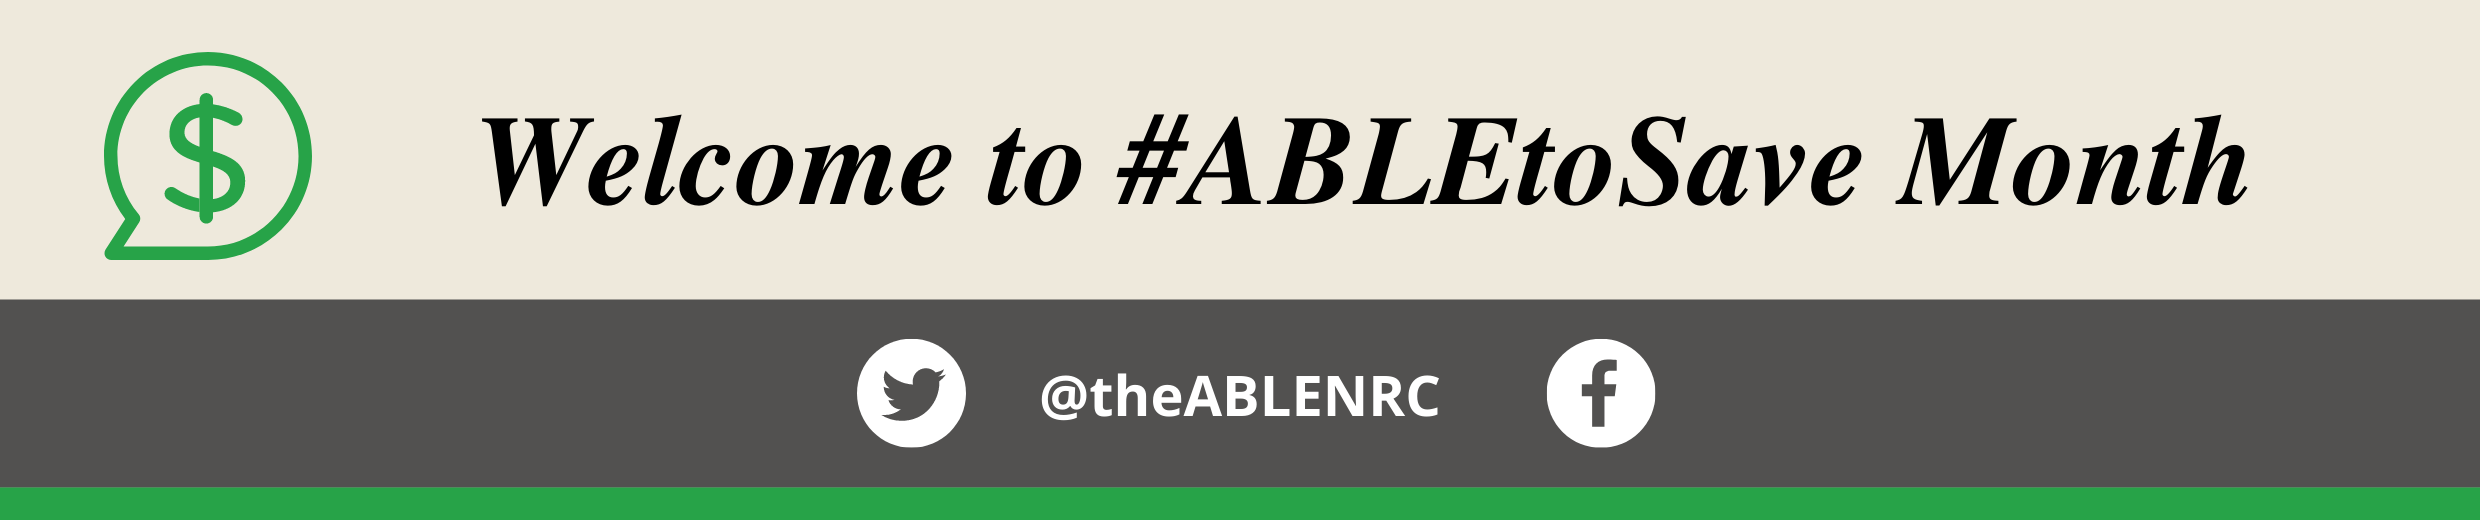 Welcome to #ABLEtoSave Month